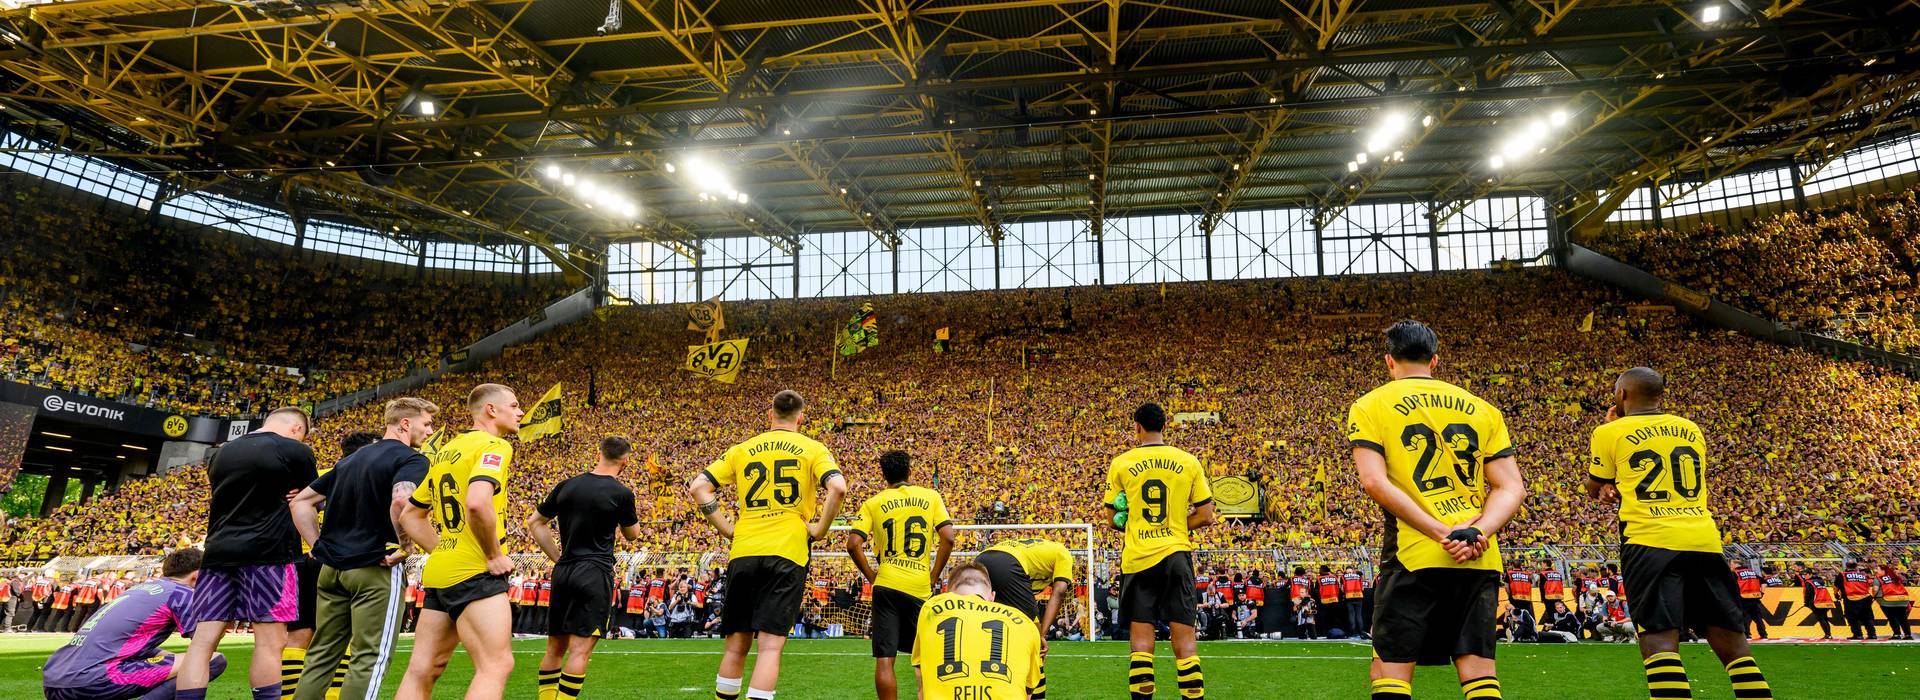 ''And that's exactly what Borussia Dortmund is about''